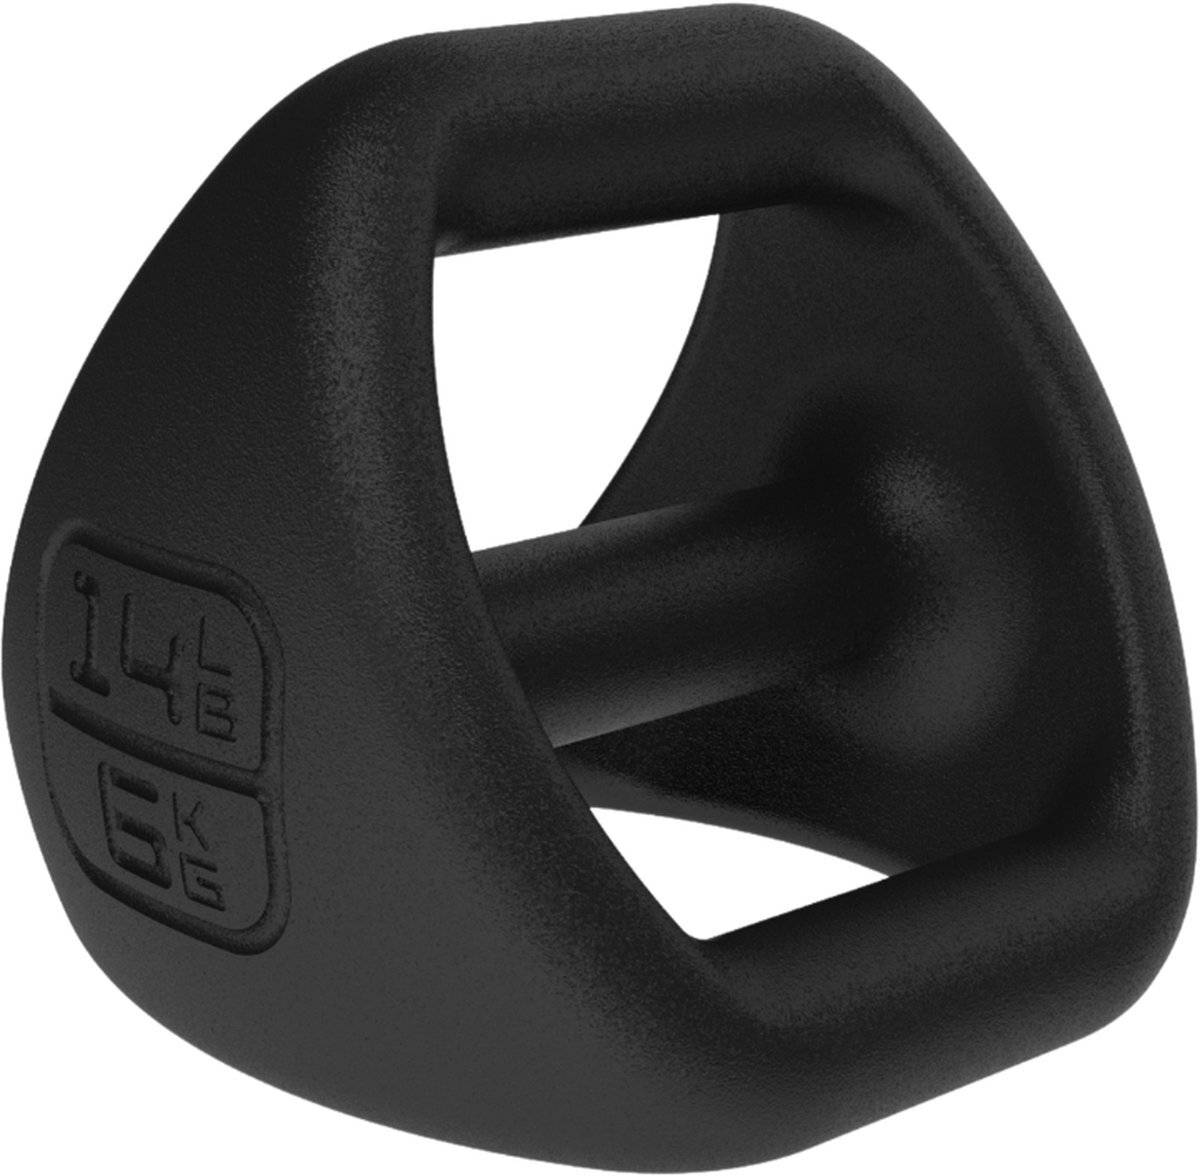 Ybell Fitness YBell Pro 6kg